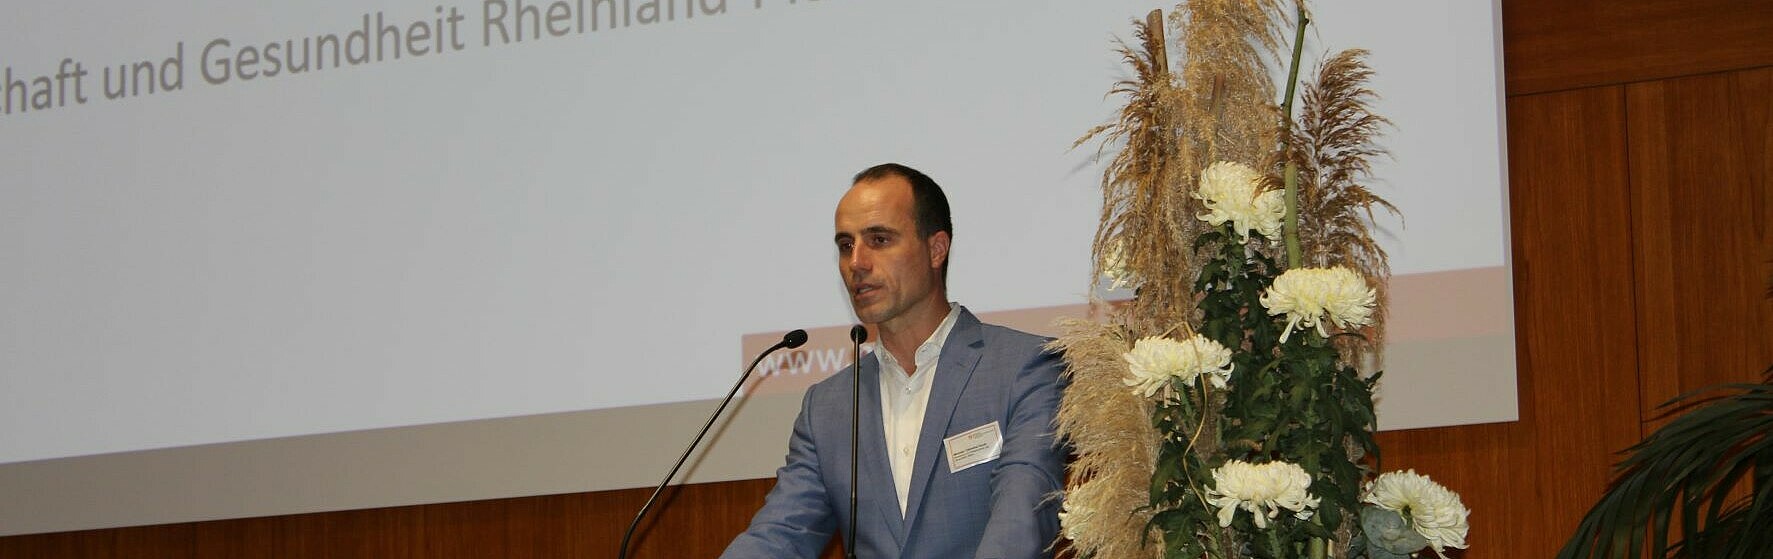 Clemens Hoch, Minister of Science and Health RLP, spoke on the topic of "Upscaling the BioNTech Experience." (Image: HWG LU)